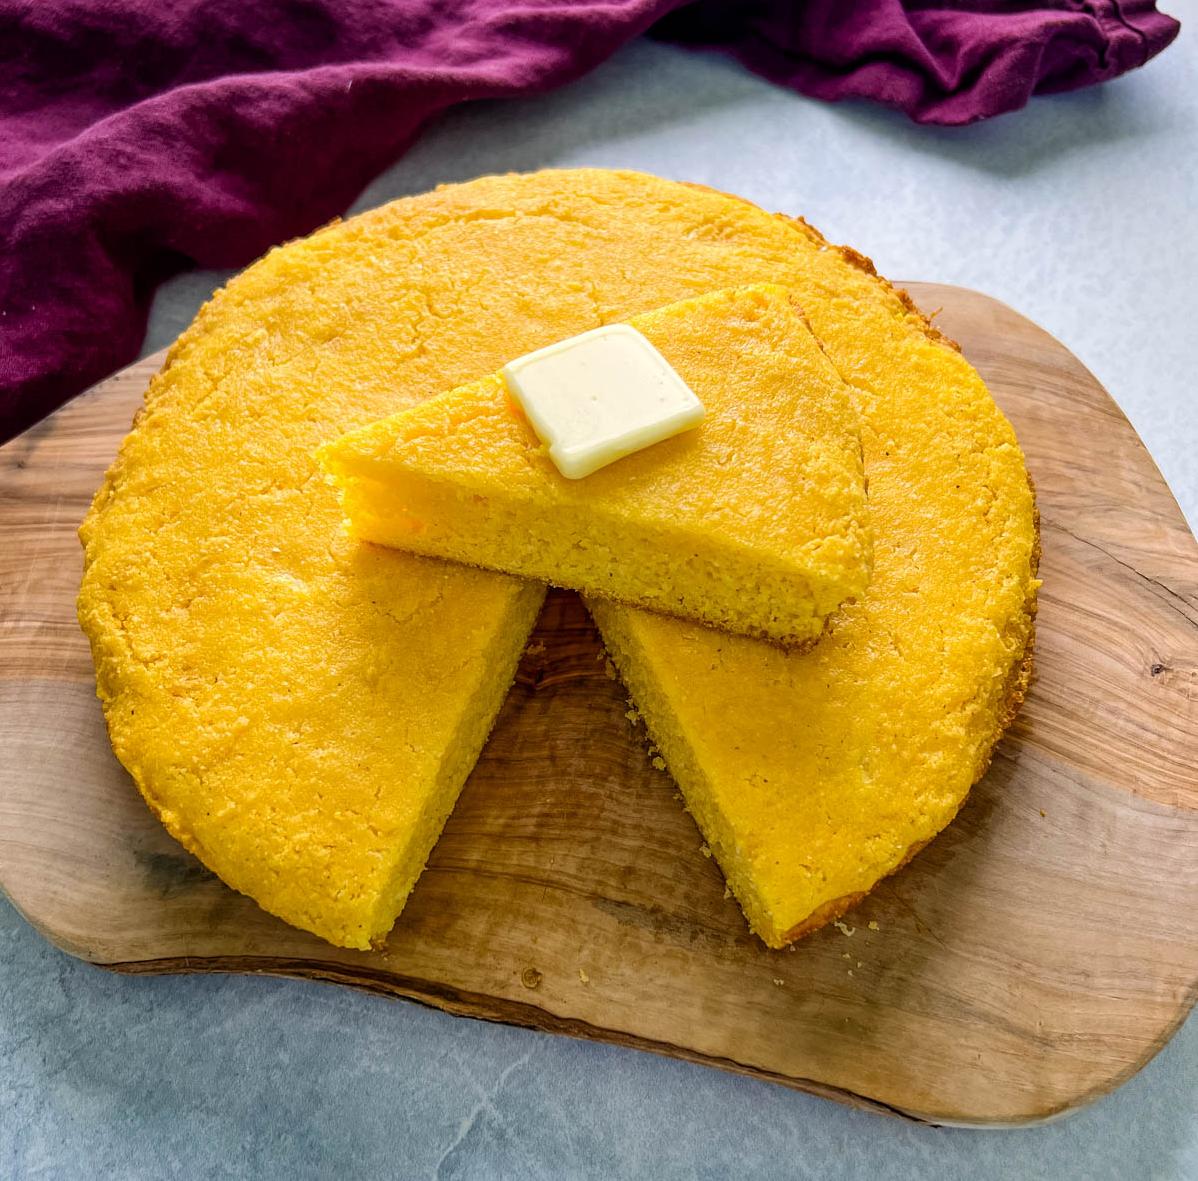  Let the aroma of warm cornbread fill your kitchen